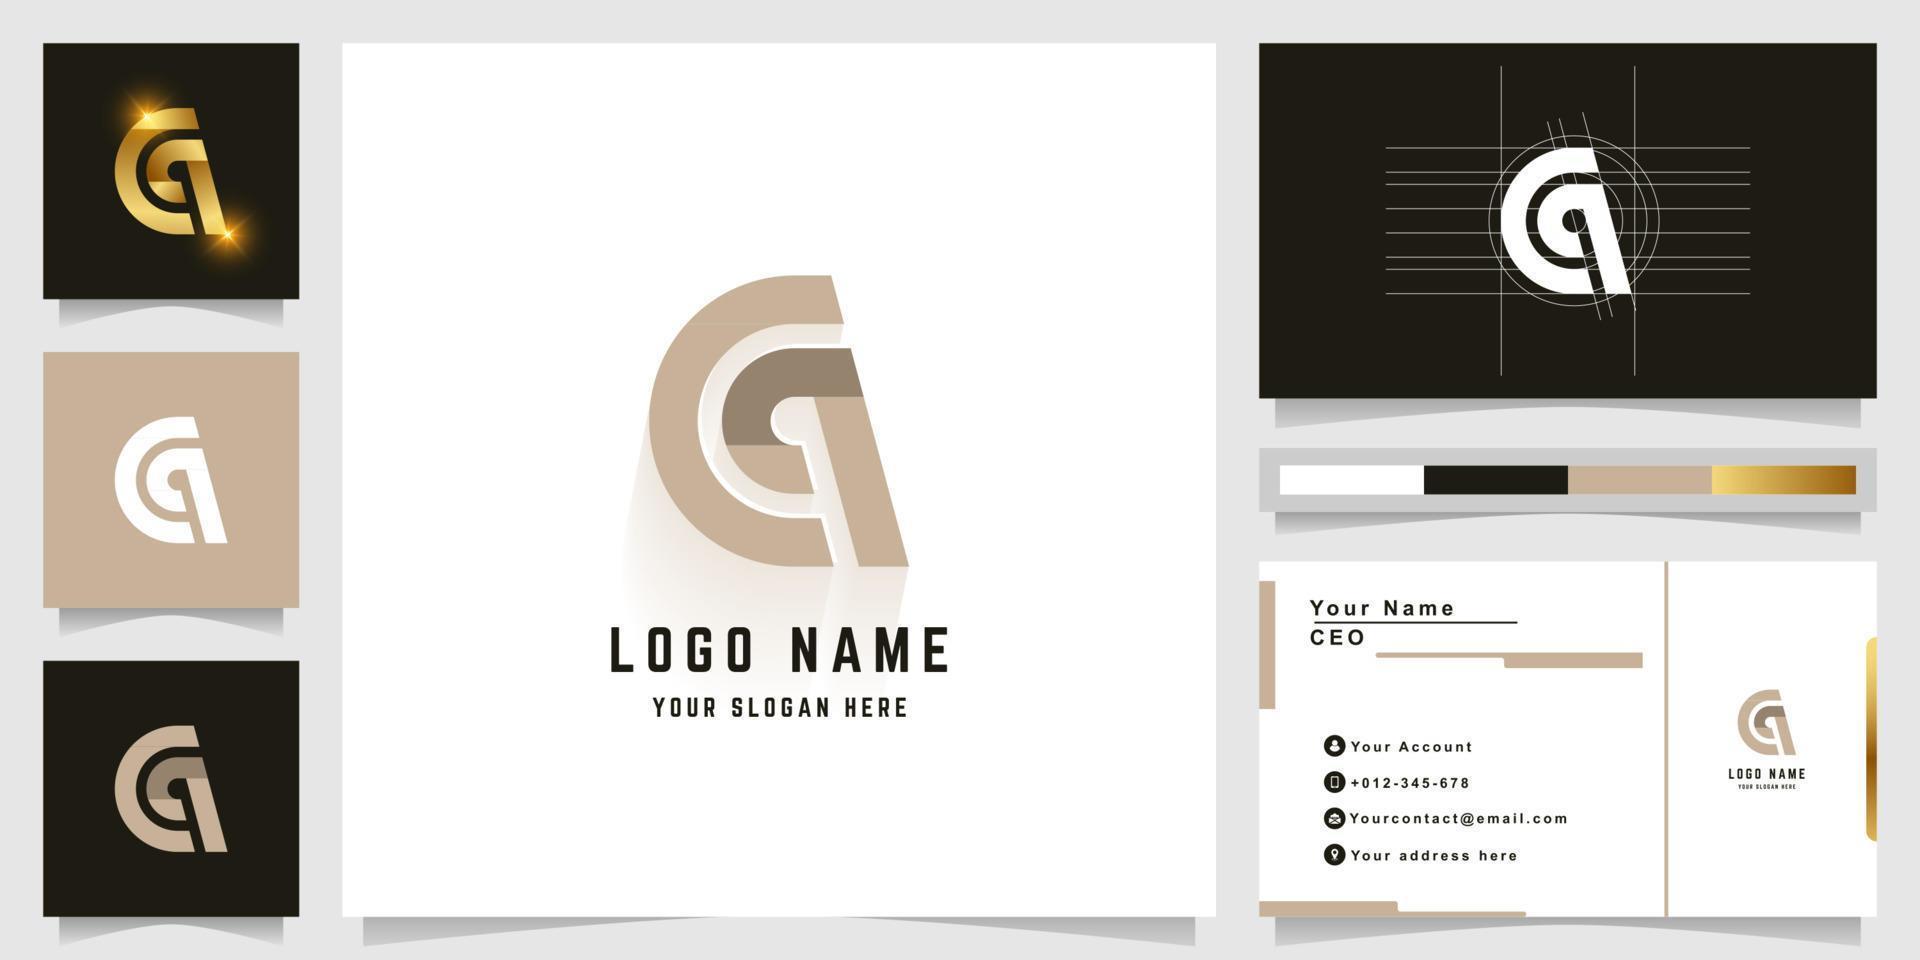 Letter Cq or Ga monogram logo with business card design vector